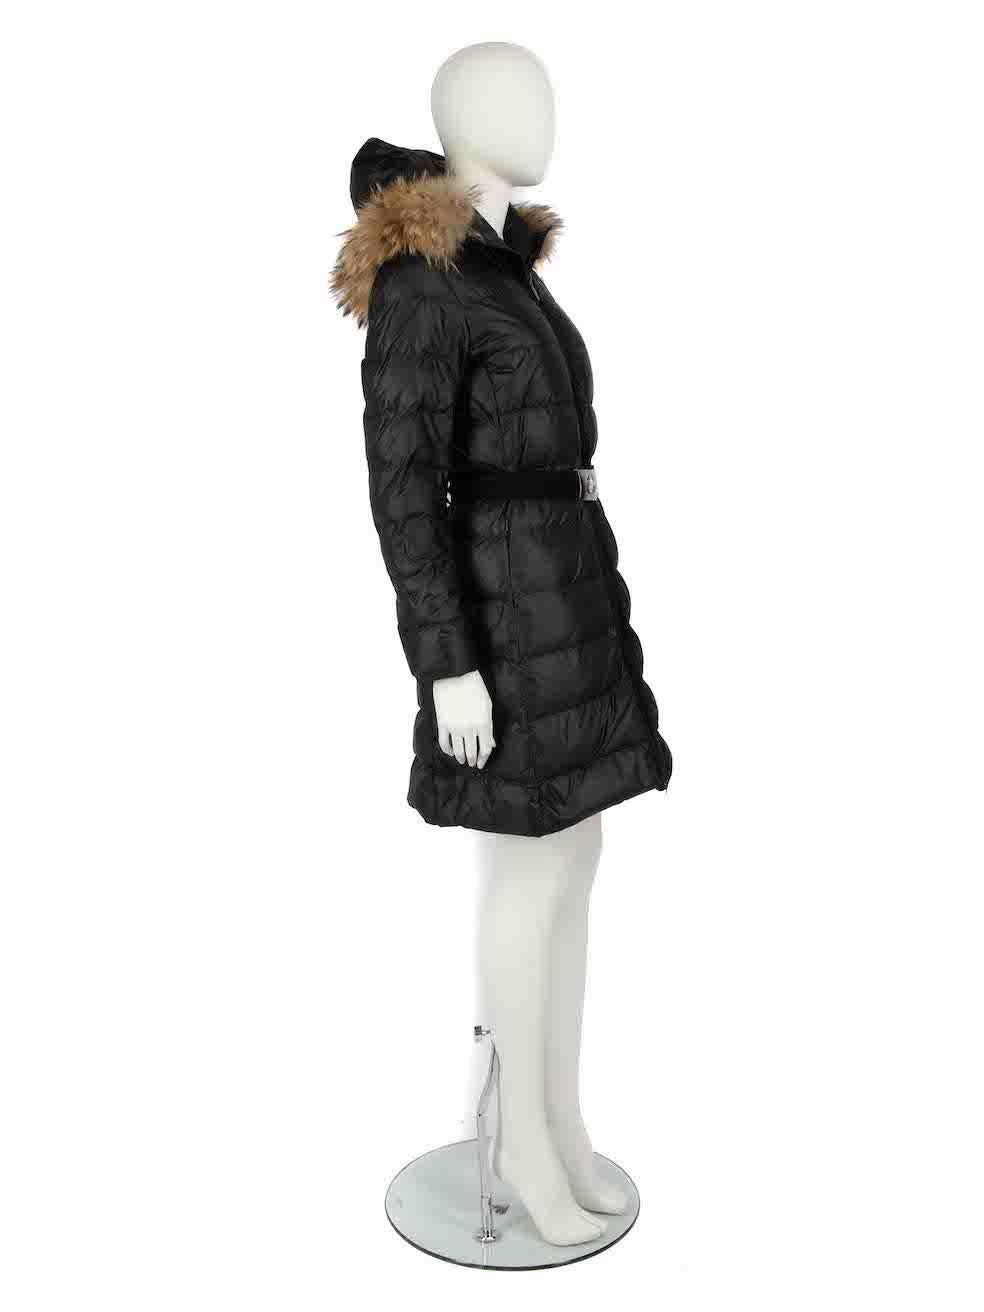 CONDITION is Very good. Minimal wear to coat is evident. Minimal wear with scratched to the exterior and light discolouration to the brand label at the lining on this used Moncler designer resale item.
 
Details
Black
Polyester
Puffer coat
Fur trim